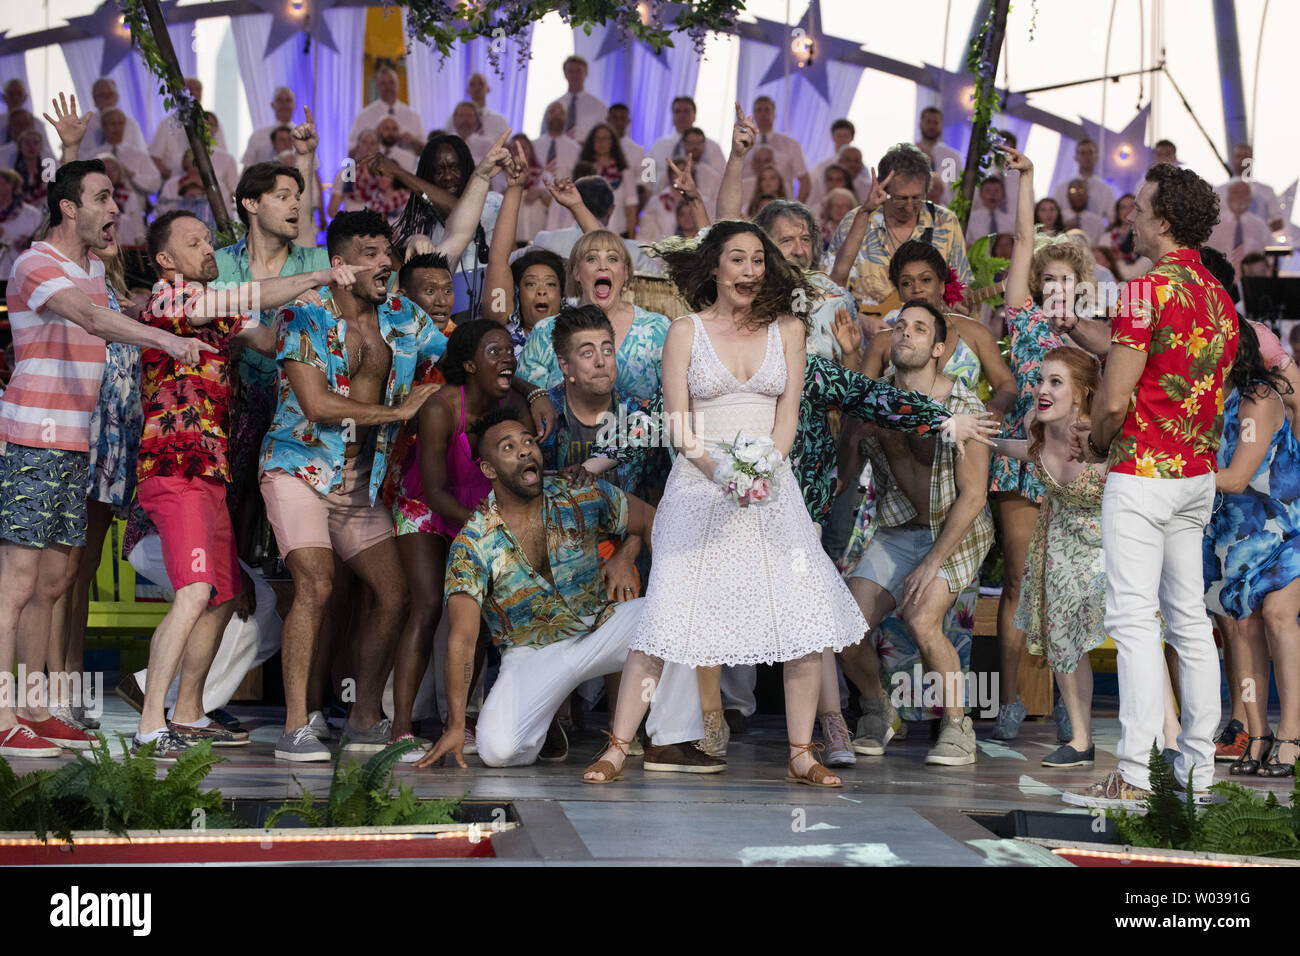 The Broadway Cast of 'Escape to Margaritaville' sing Jimmy Buffett songs during a dress rehearsal for the Capitol Fourth concert in Washington, DC on July 3, 2018.  The annual PBS TV show will be performed live with fireworks during the Fourth of July celebrations in the nation's capital on July 4, 2018.   Photo by Pat Benic Stock Photo